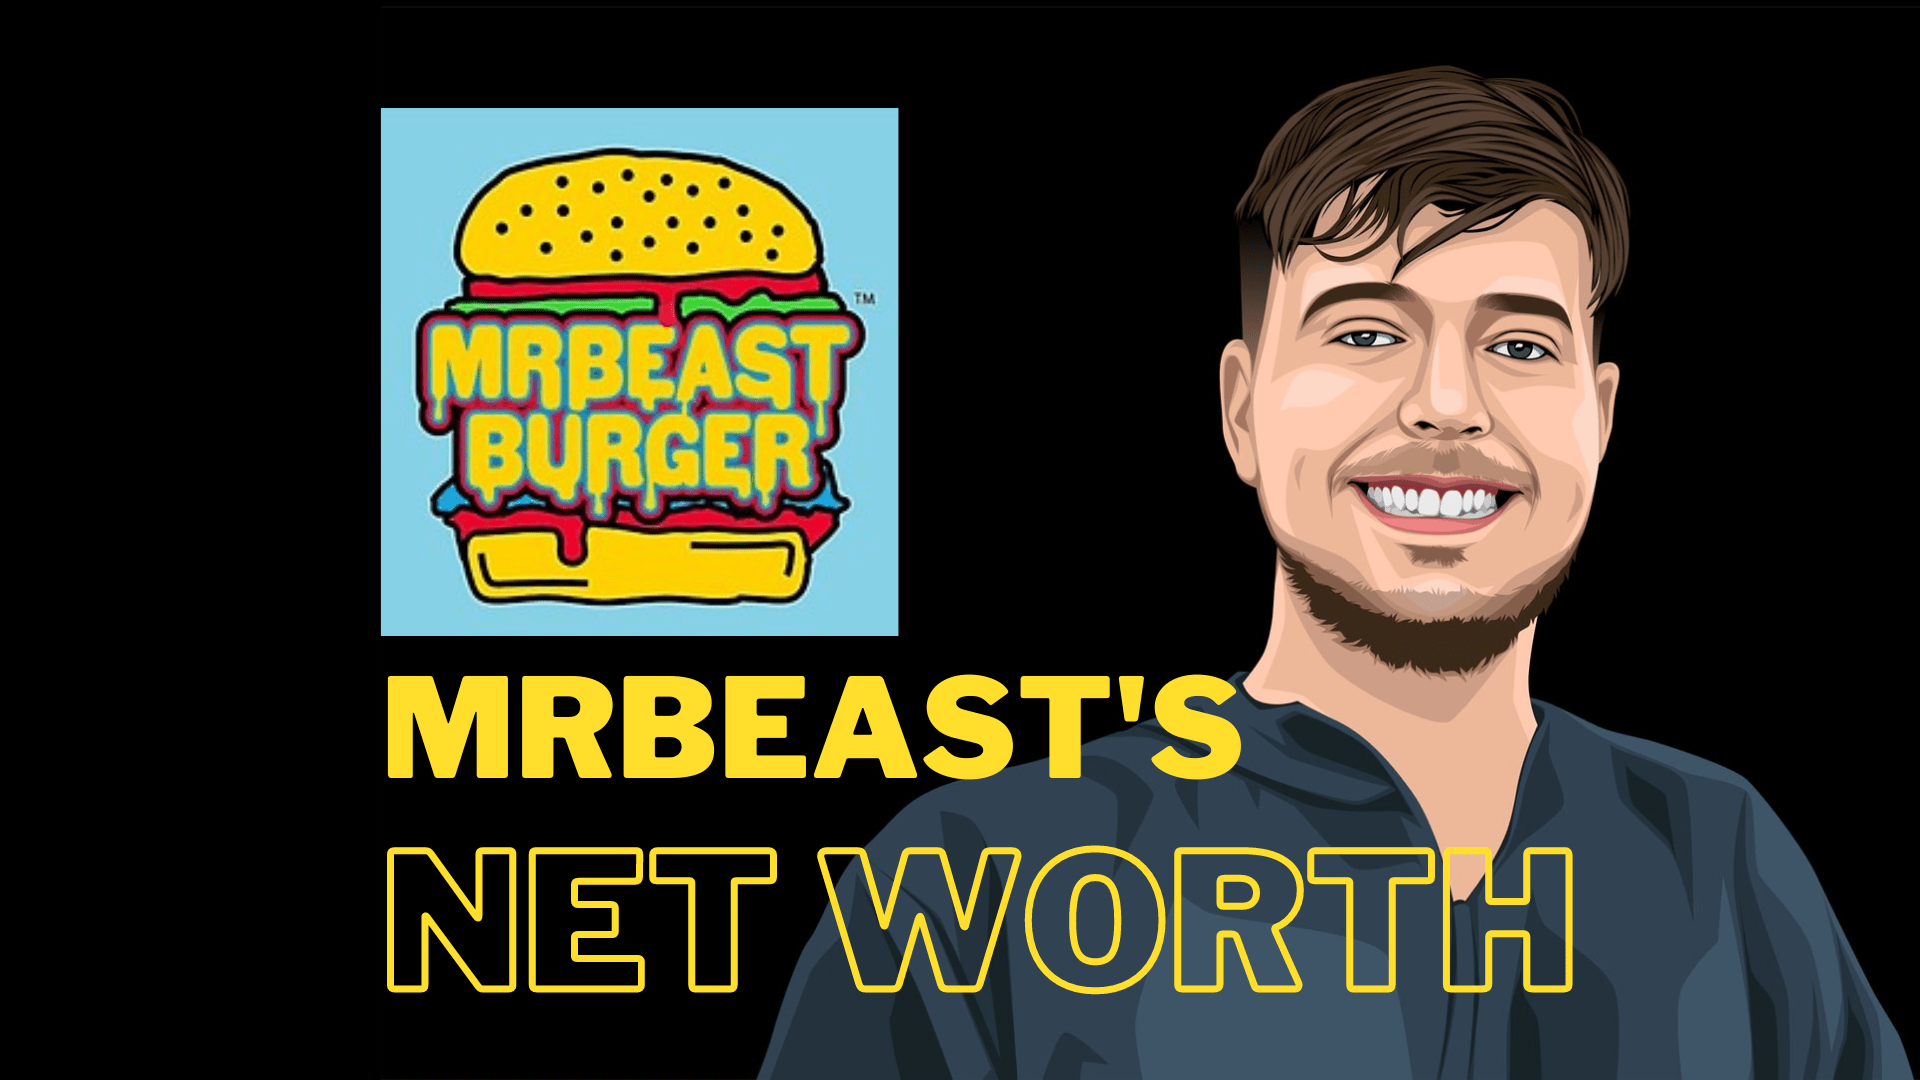 How Much is MrBeast Worth? - Growth Hackers